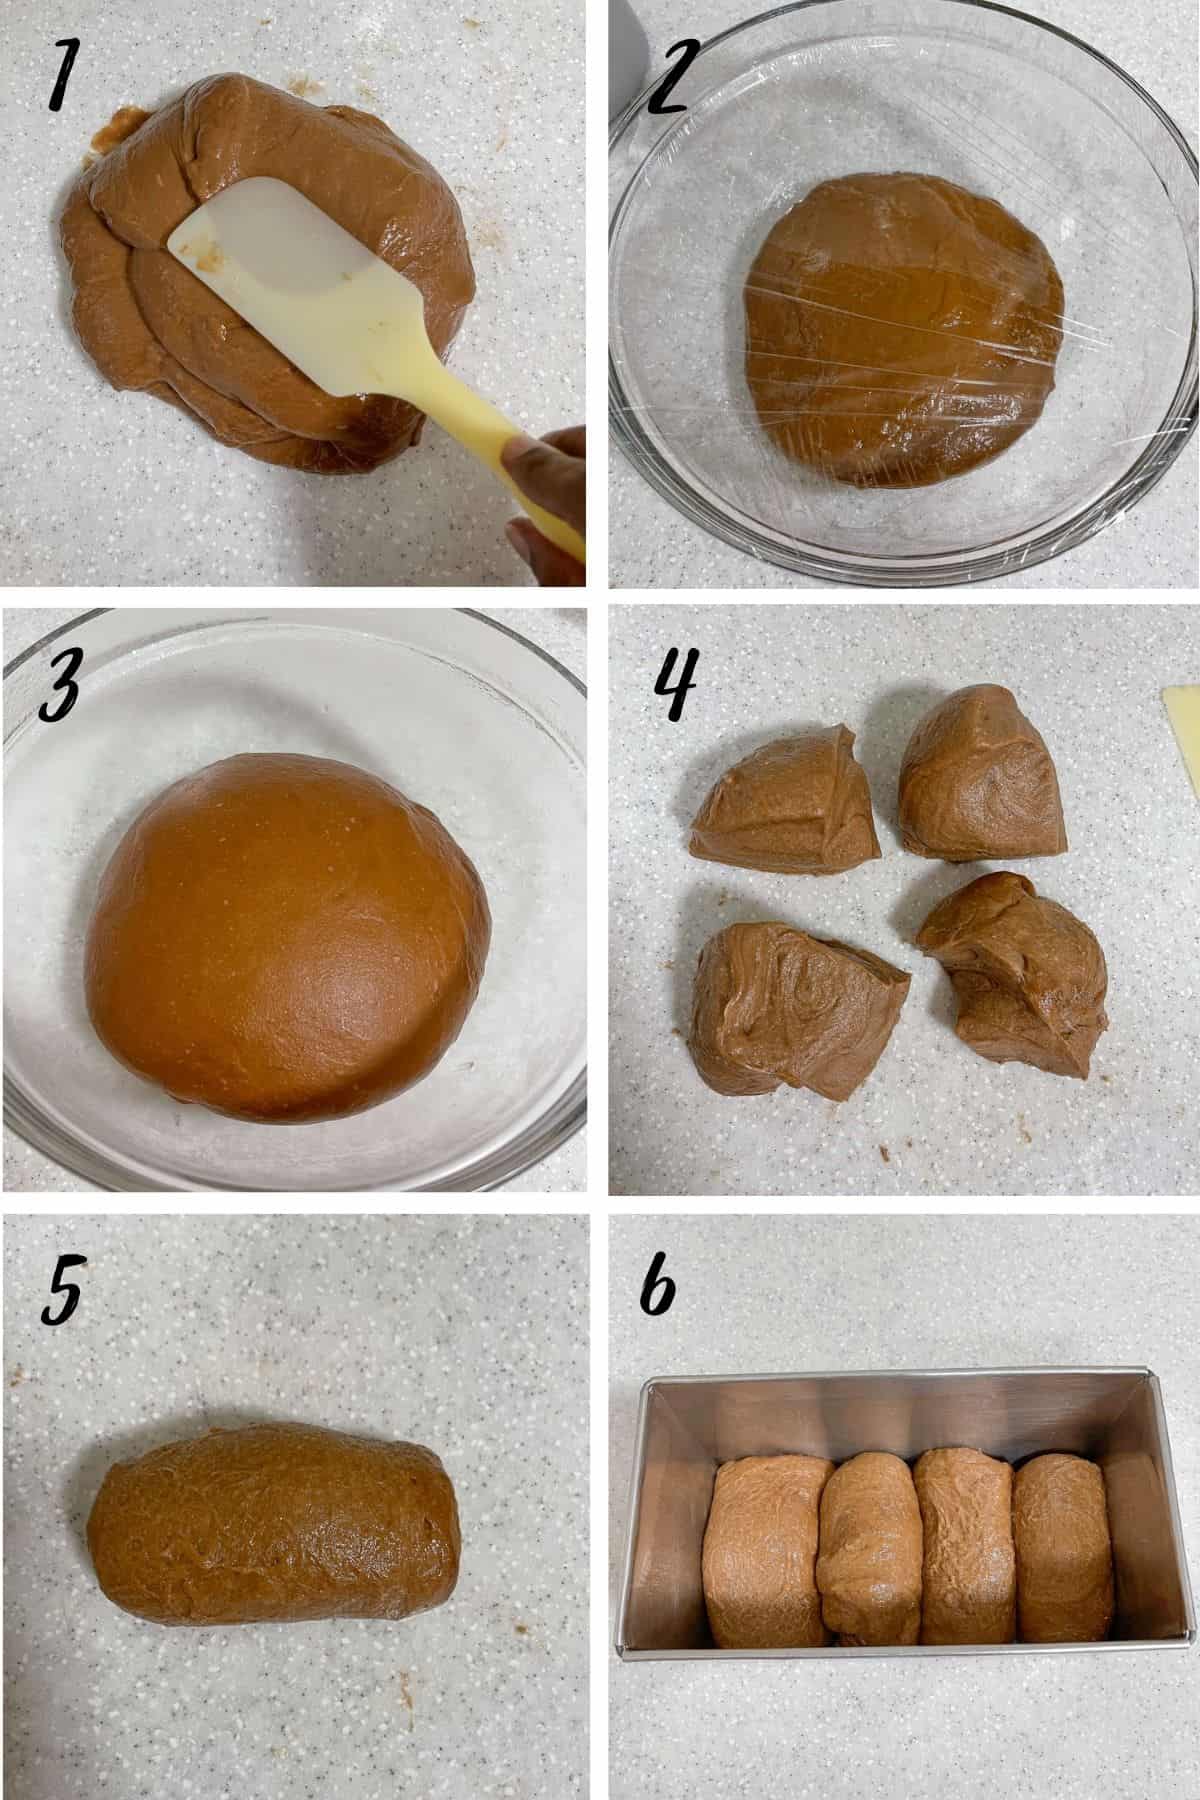 A poster of 6 images showing how to knead bread dough and place it in a loaf tin.